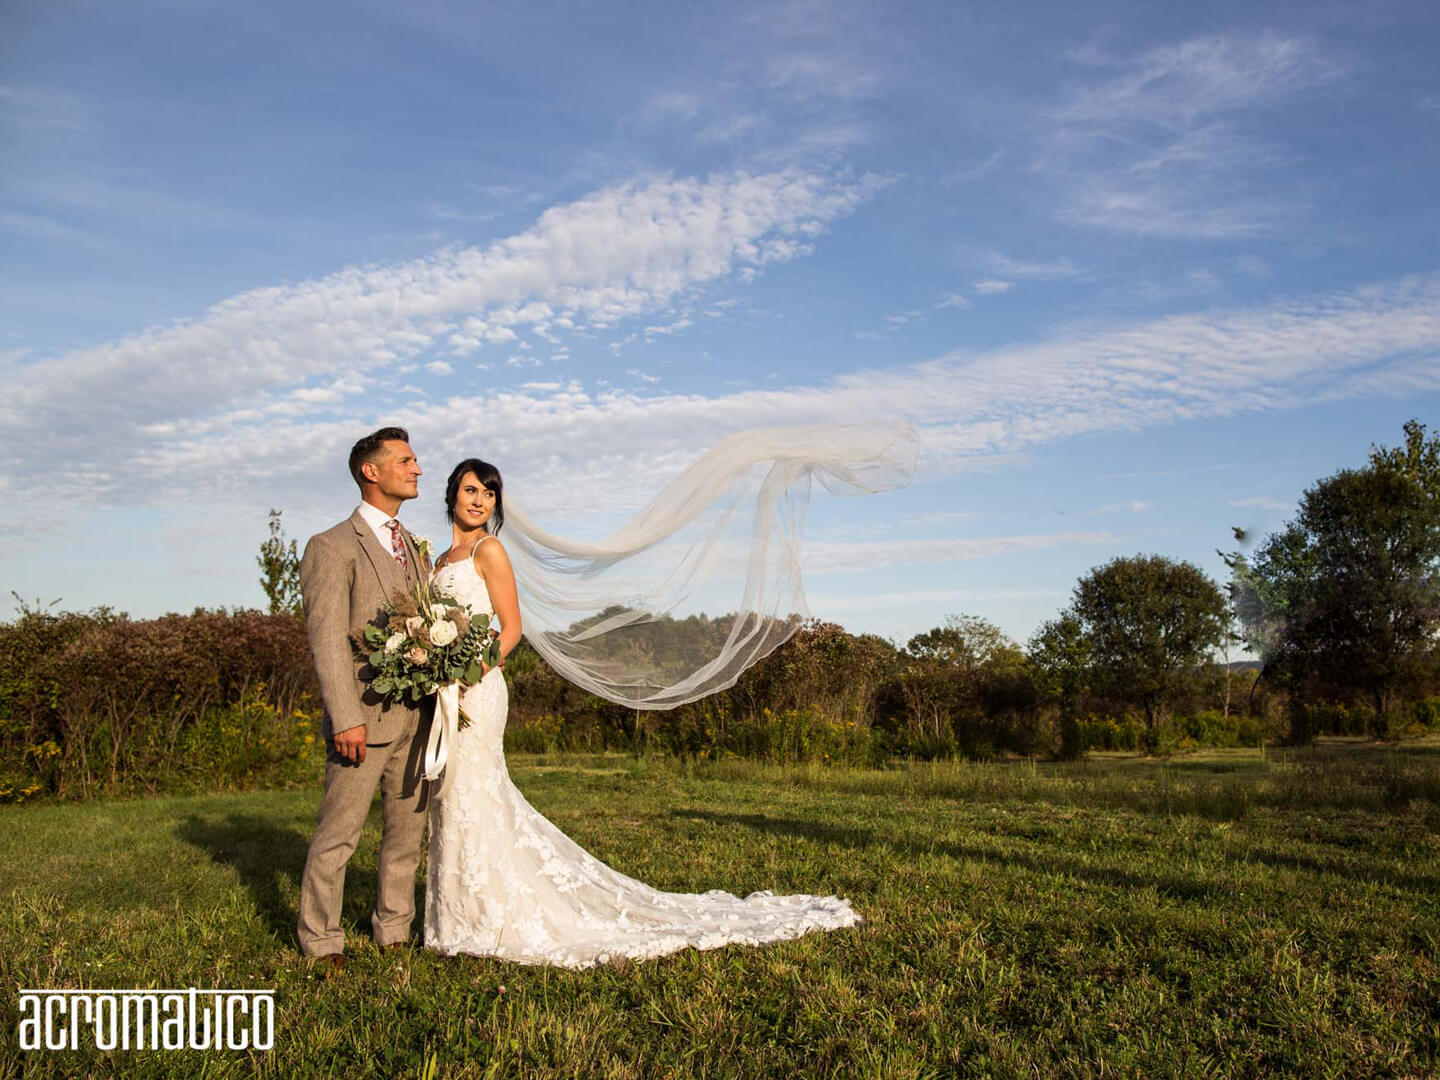 A bride and groom with the wind gently blowing the bride's veil and the blue sky behind them